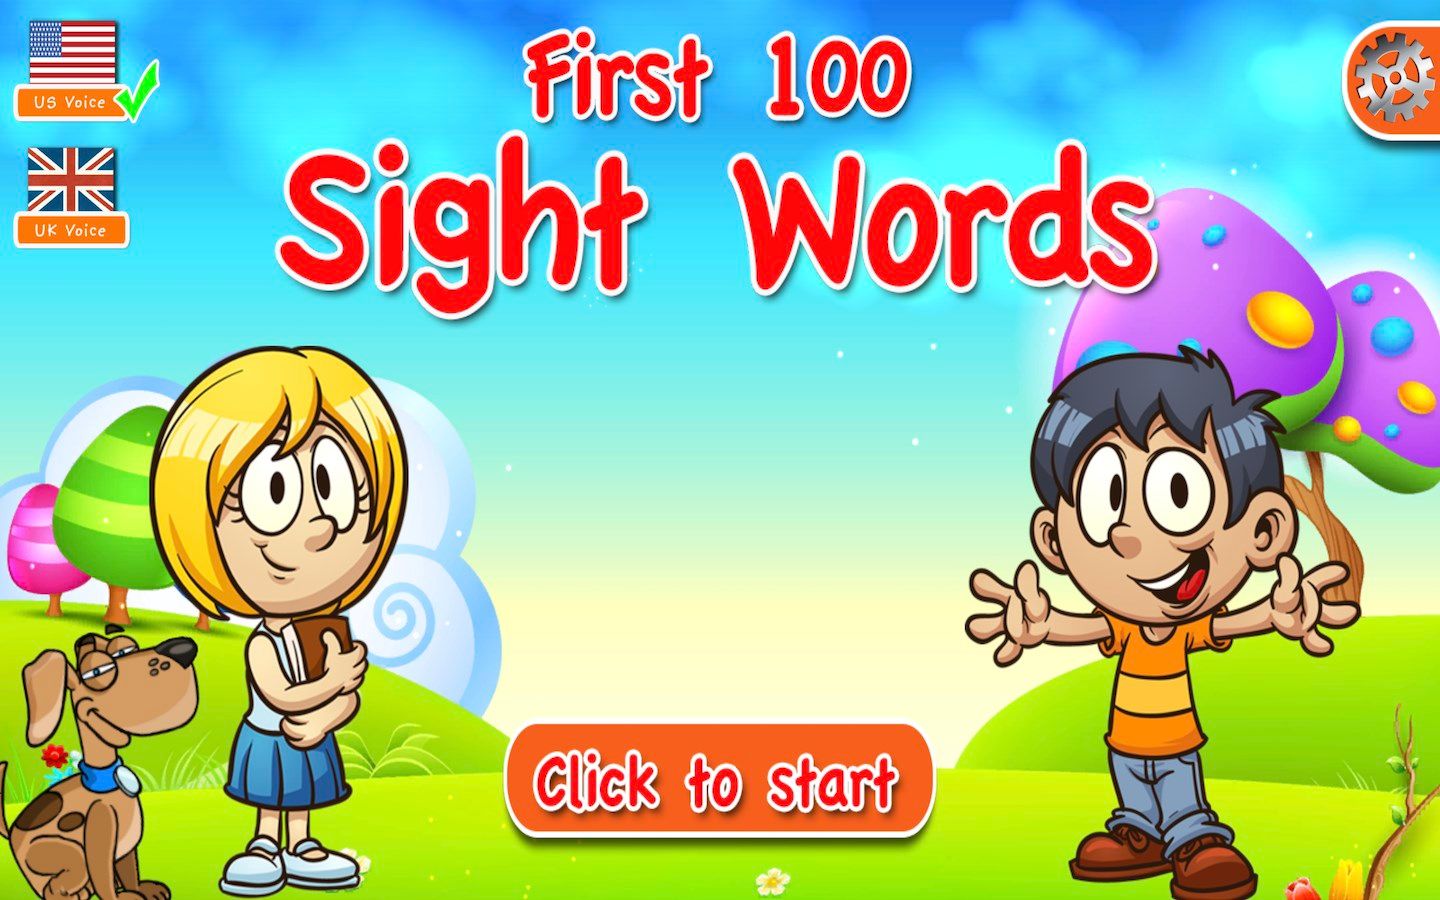 First 100 Sightwords